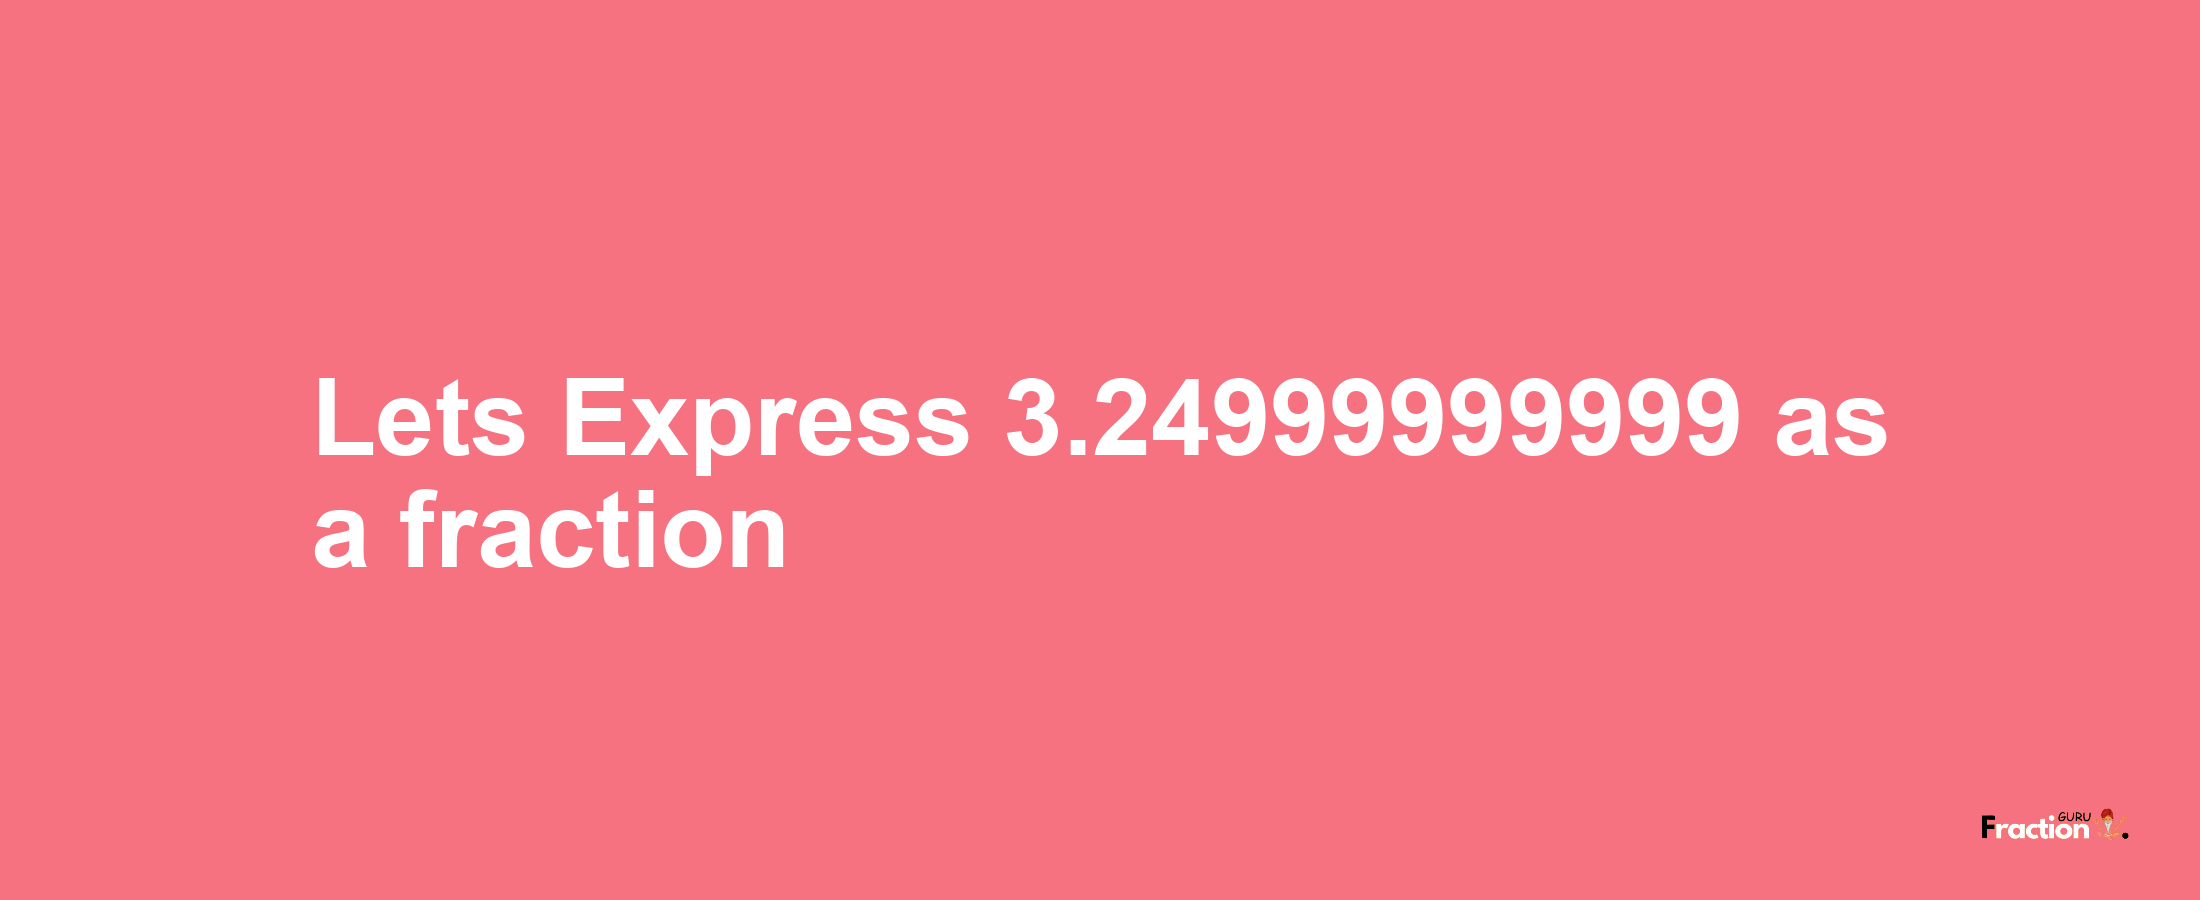 Lets Express 3.24999999999 as afraction